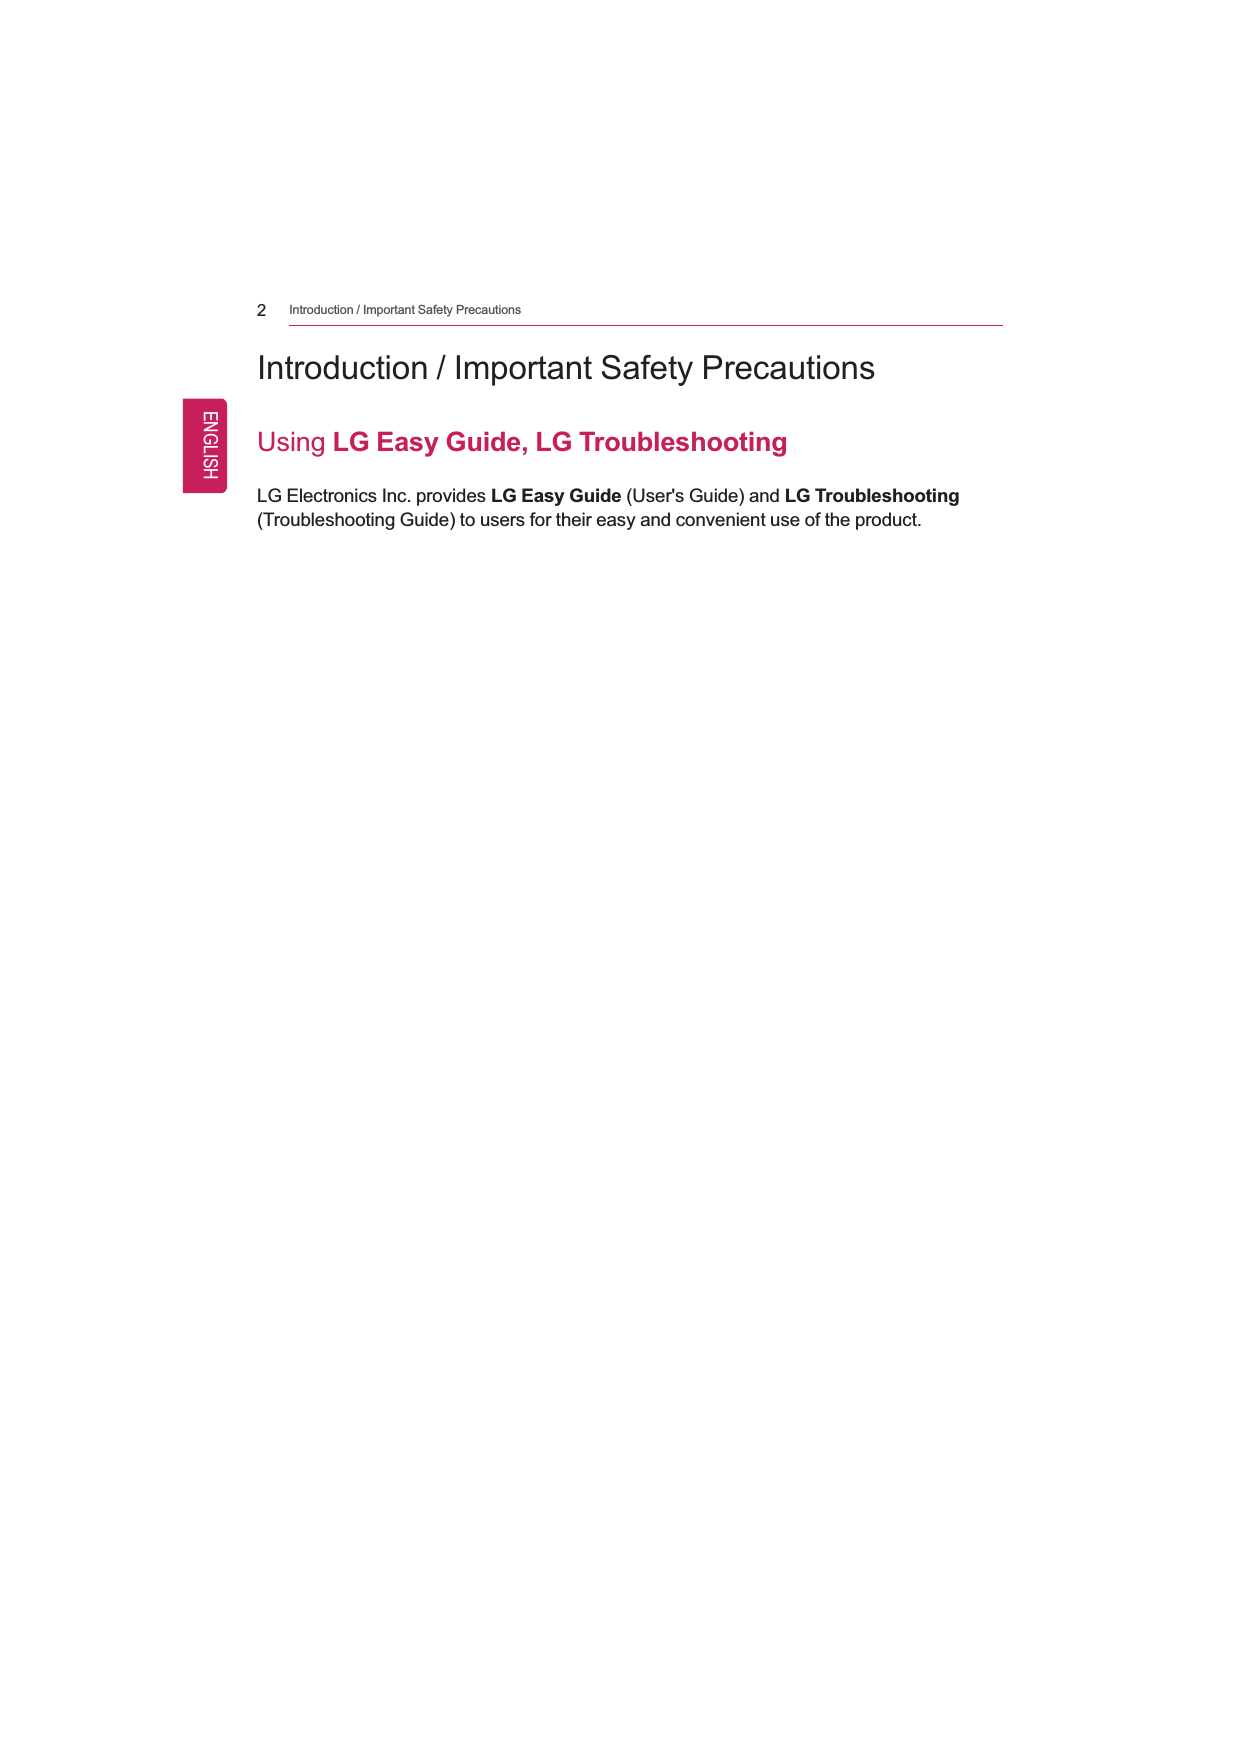 2Introduction / Important Safety PrecautionsIntroduction / Important Safety PrecautionsUsing LG Easy Guide, LG TroubleshootingLG Electronics Inc. provides LG Easy Guide (User&apos;s Guide) and LG Troubleshooting(Troubleshooting Guide) to users for their easy and convenient use of the product.ENGLISH